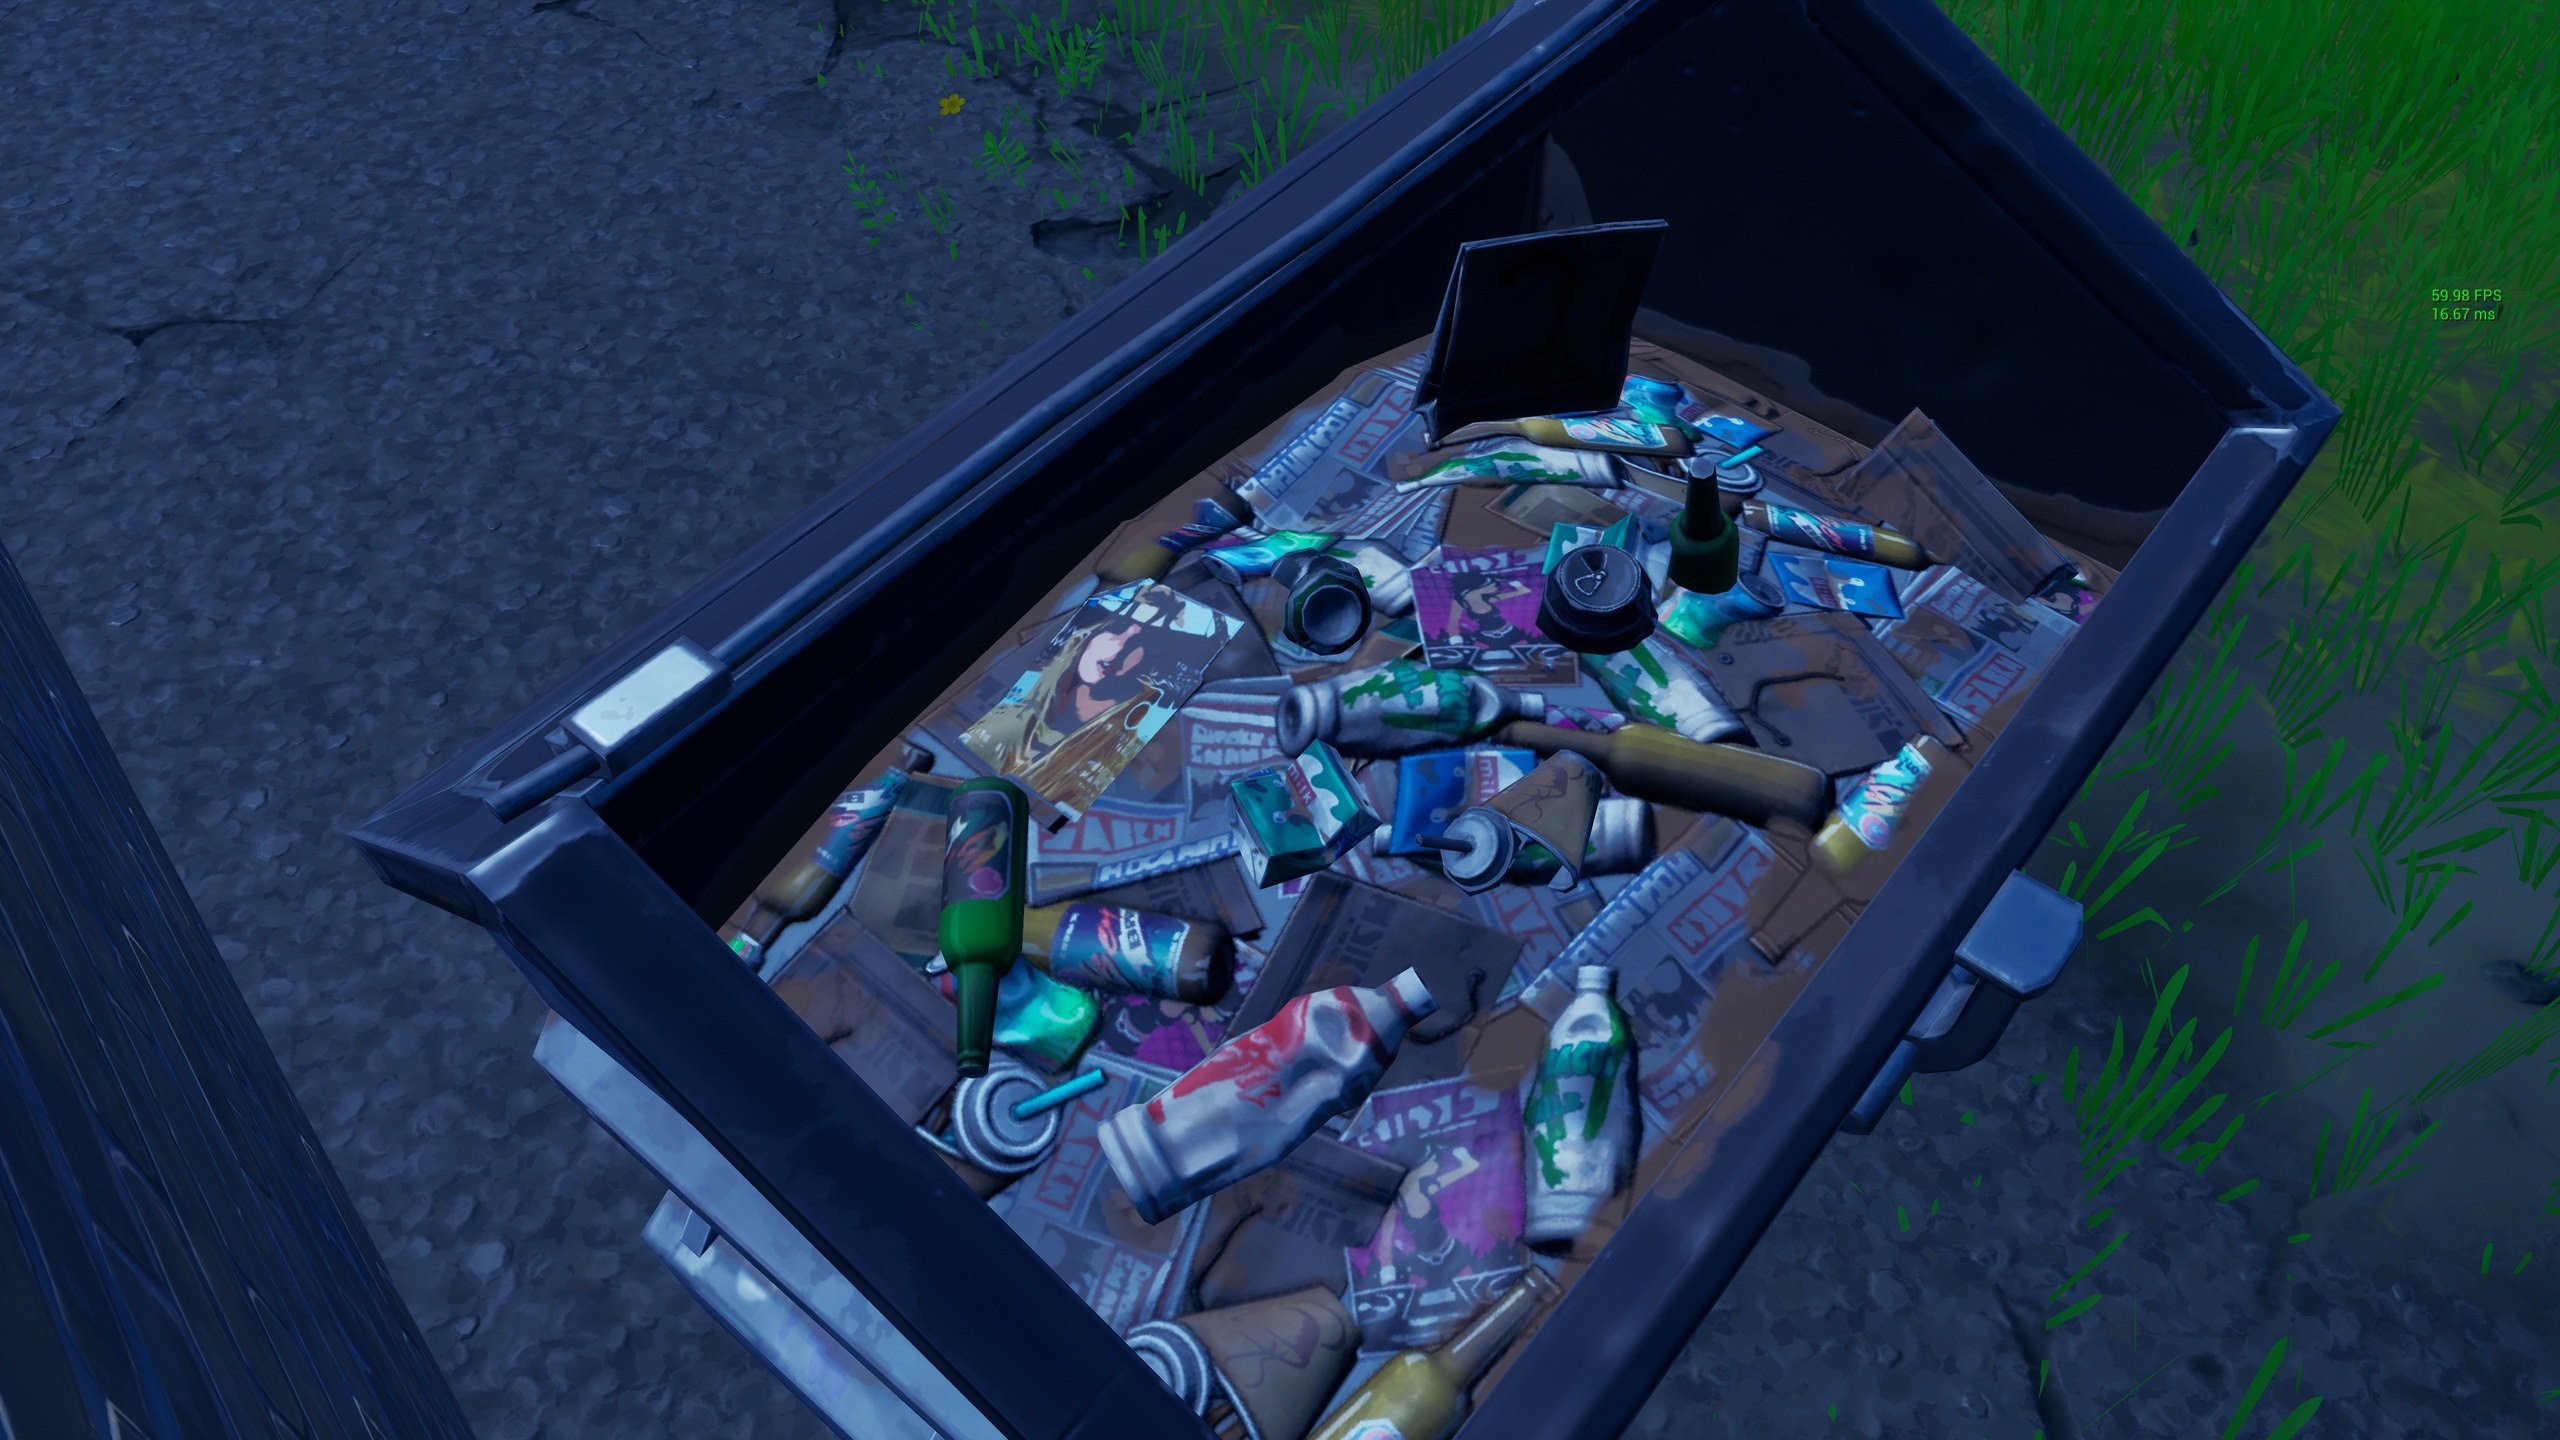 Taylor Swift was found in a trash dumpster in Fortnite  